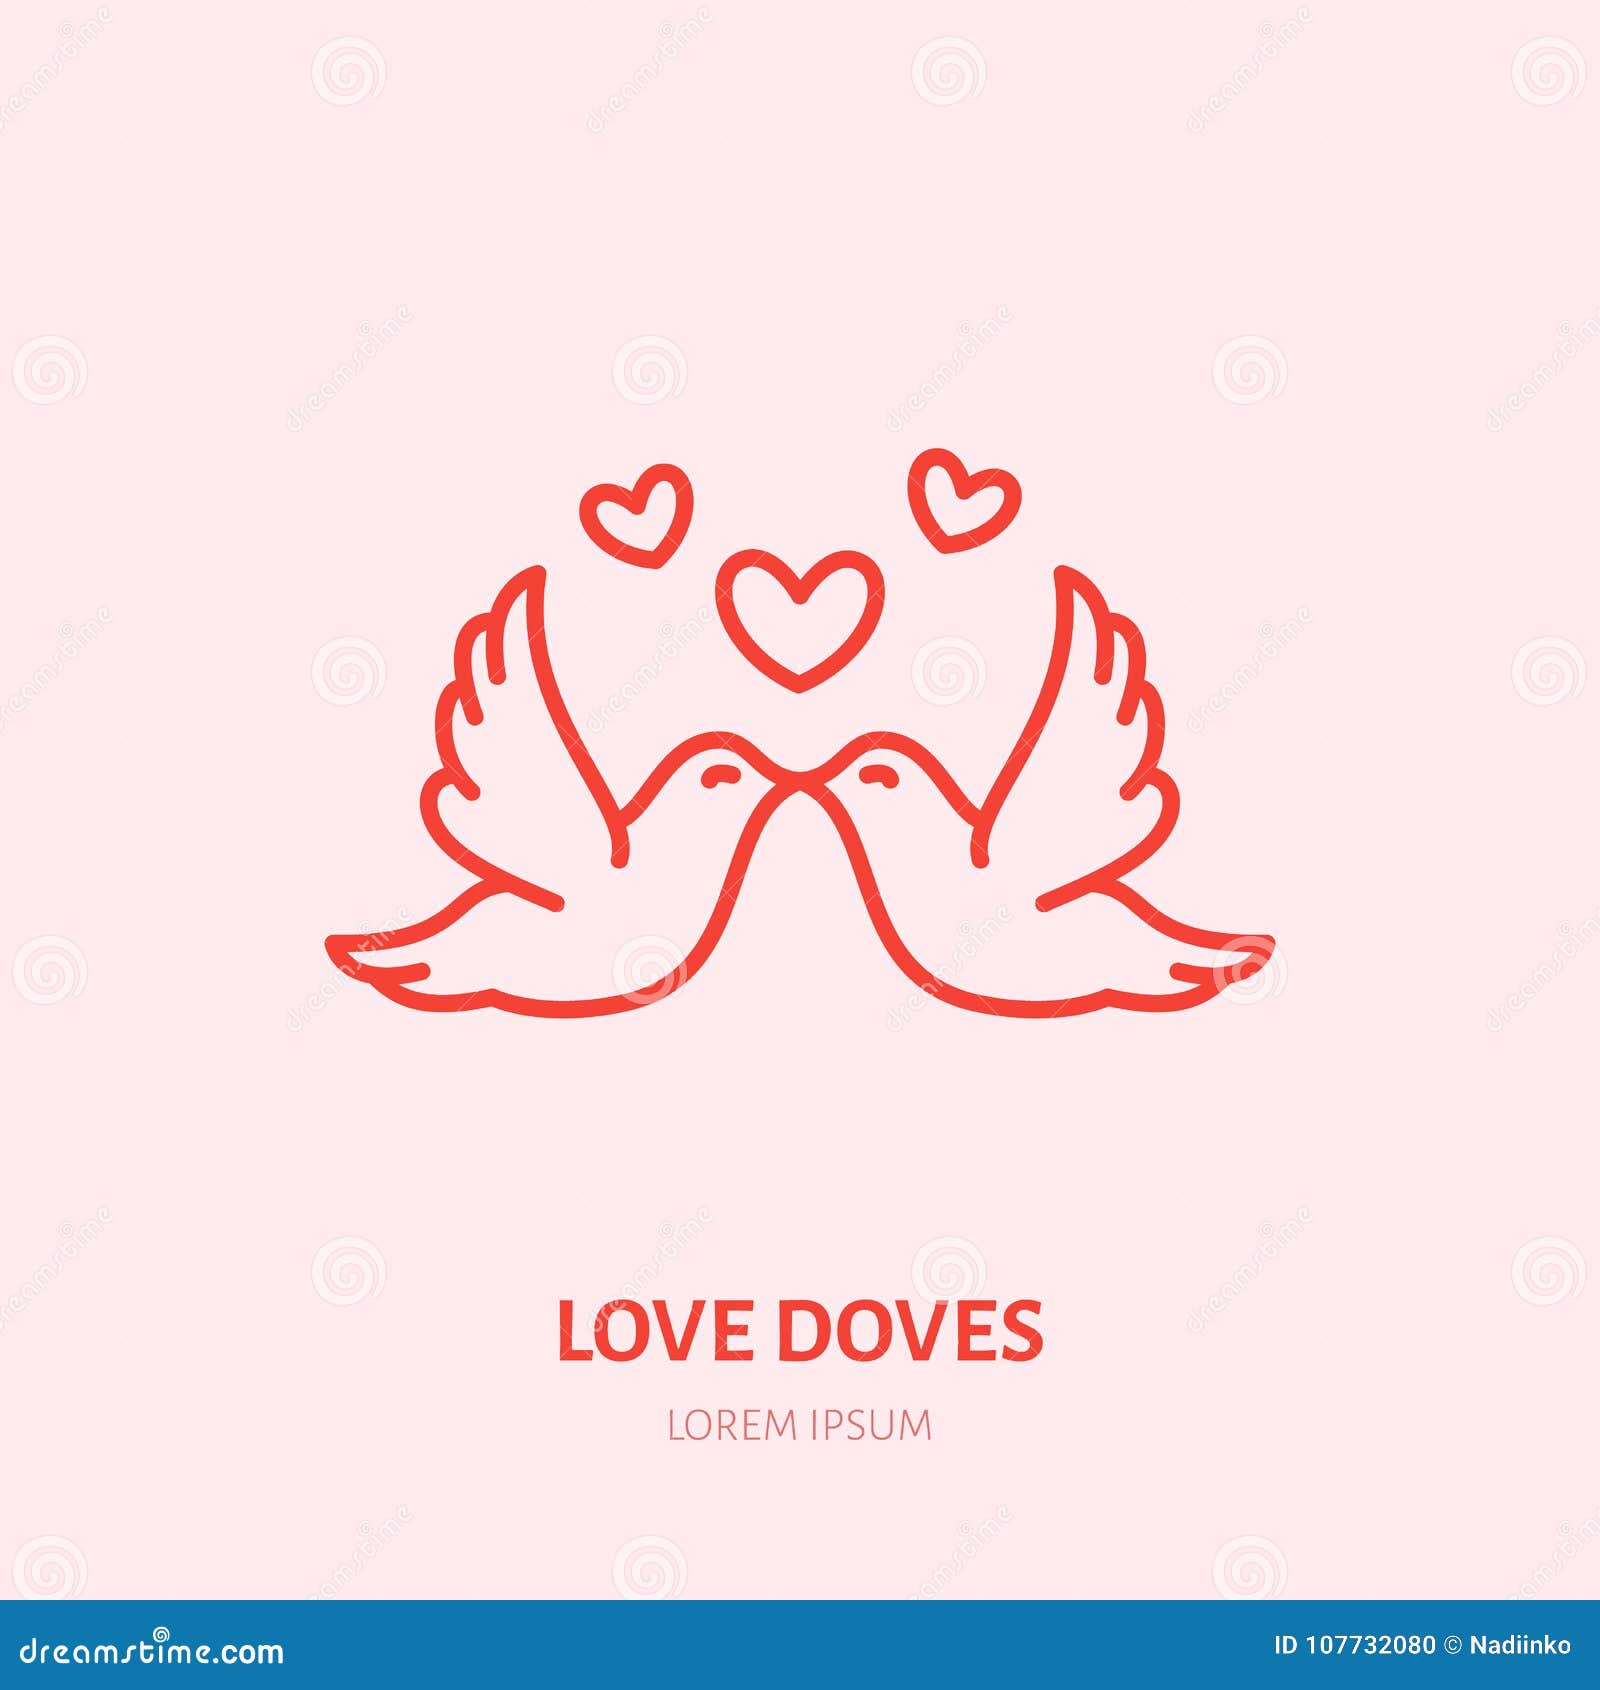 kissing doves . two flying birds in love flat line icon, romantic relationship. valentines day greeting sign